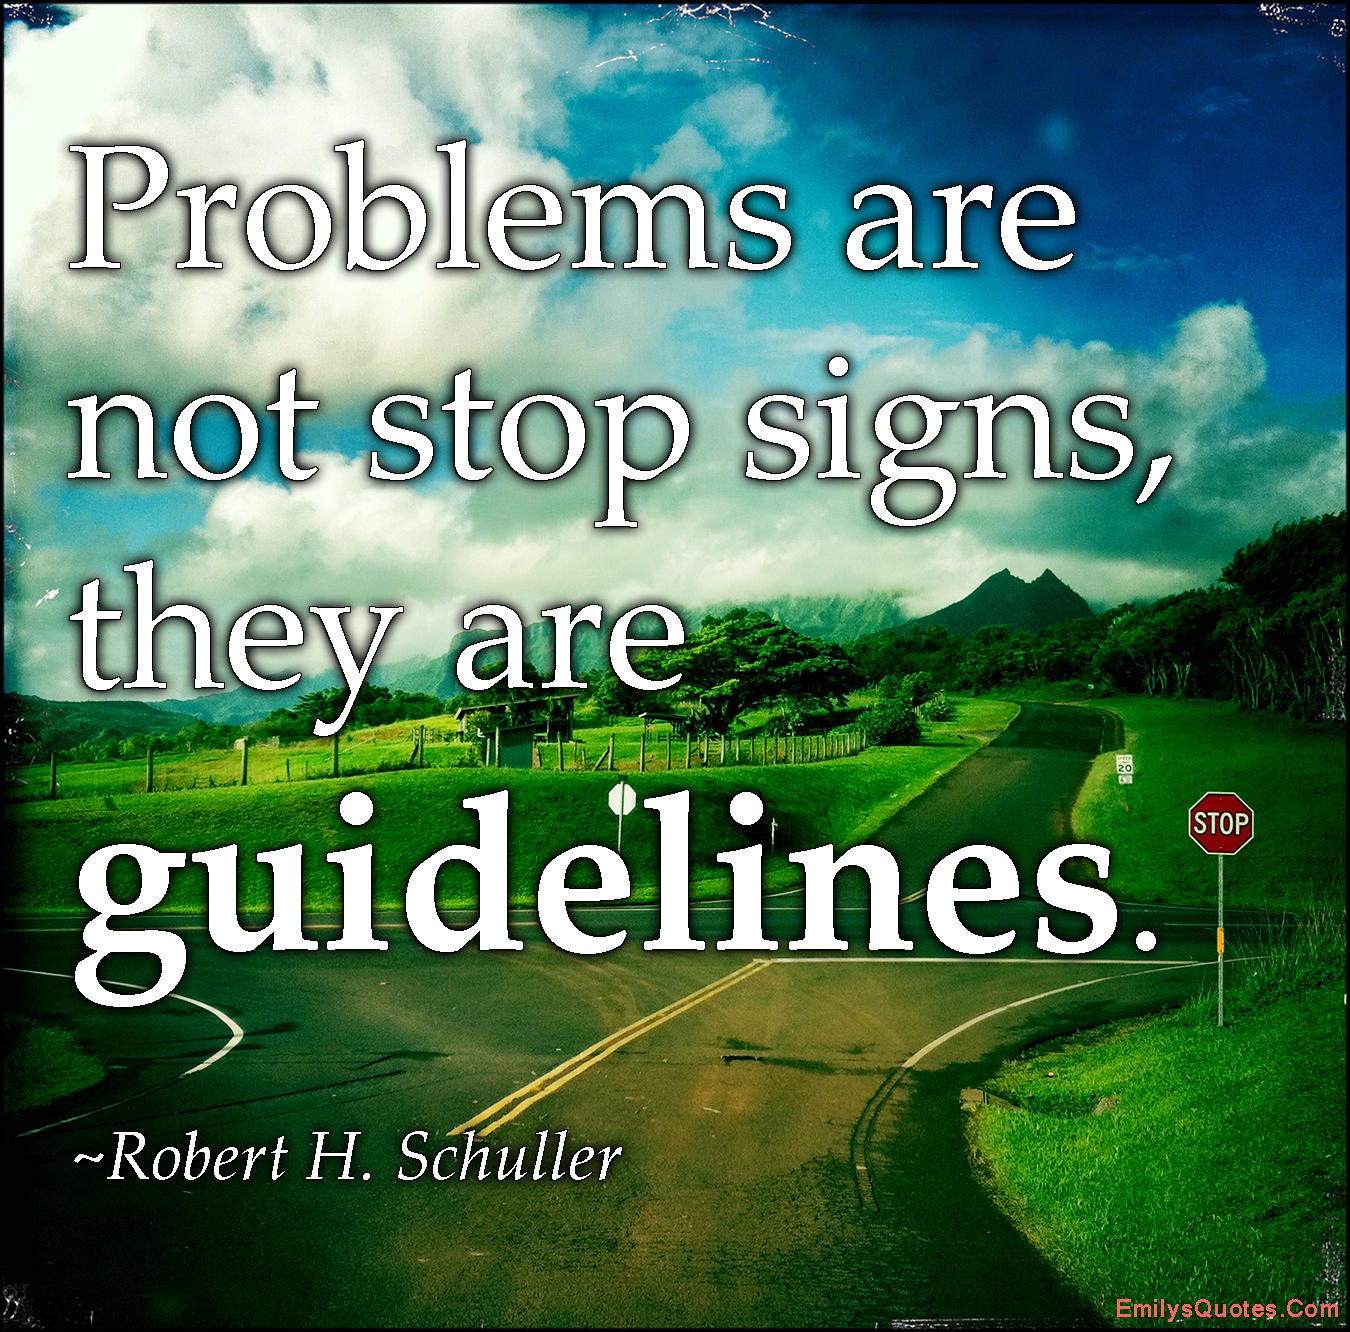 Problems are not stop signs, they are guidelines